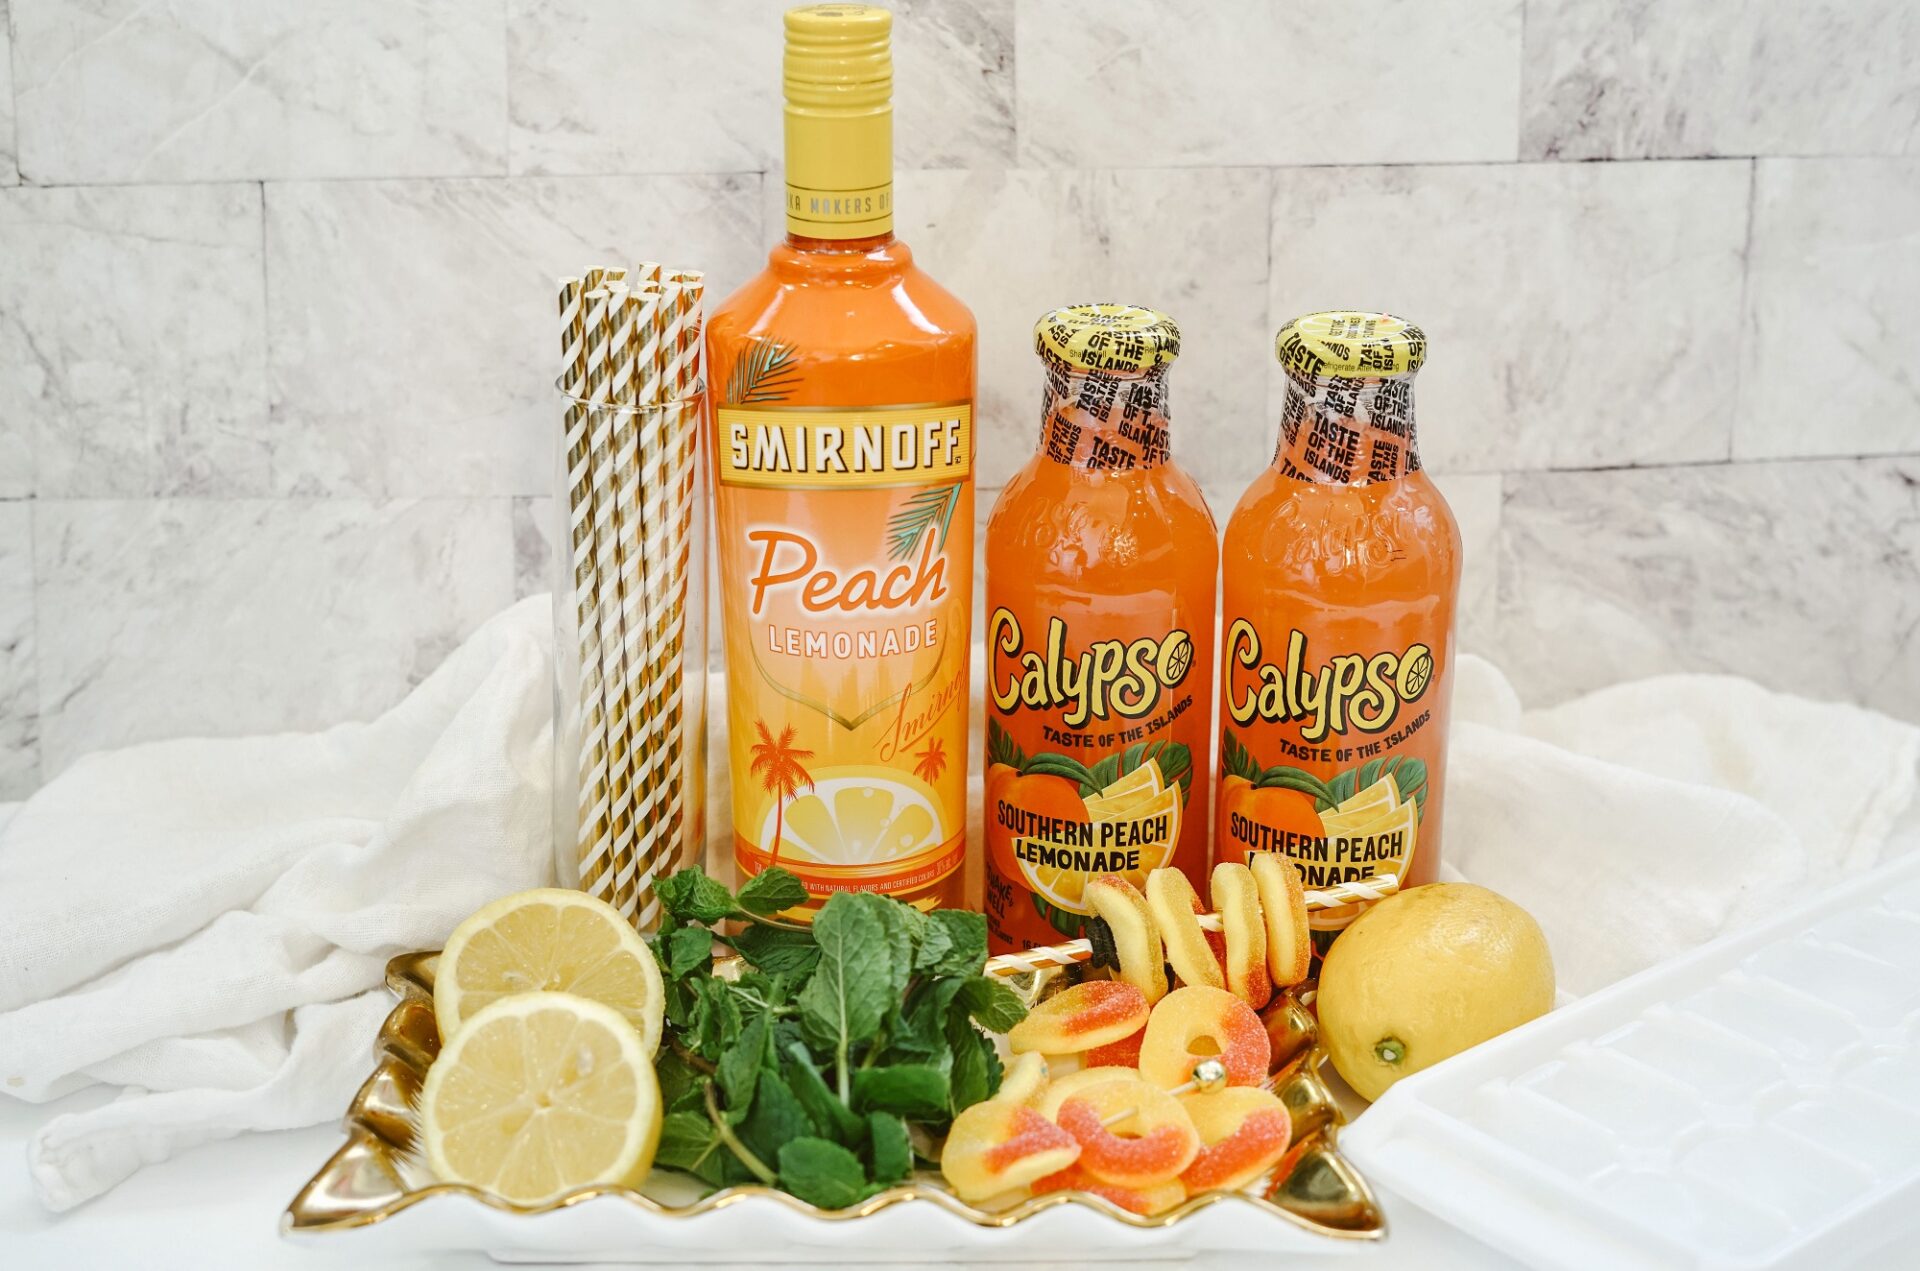 Ingredients for Spiked Southern Peach Lemonade.